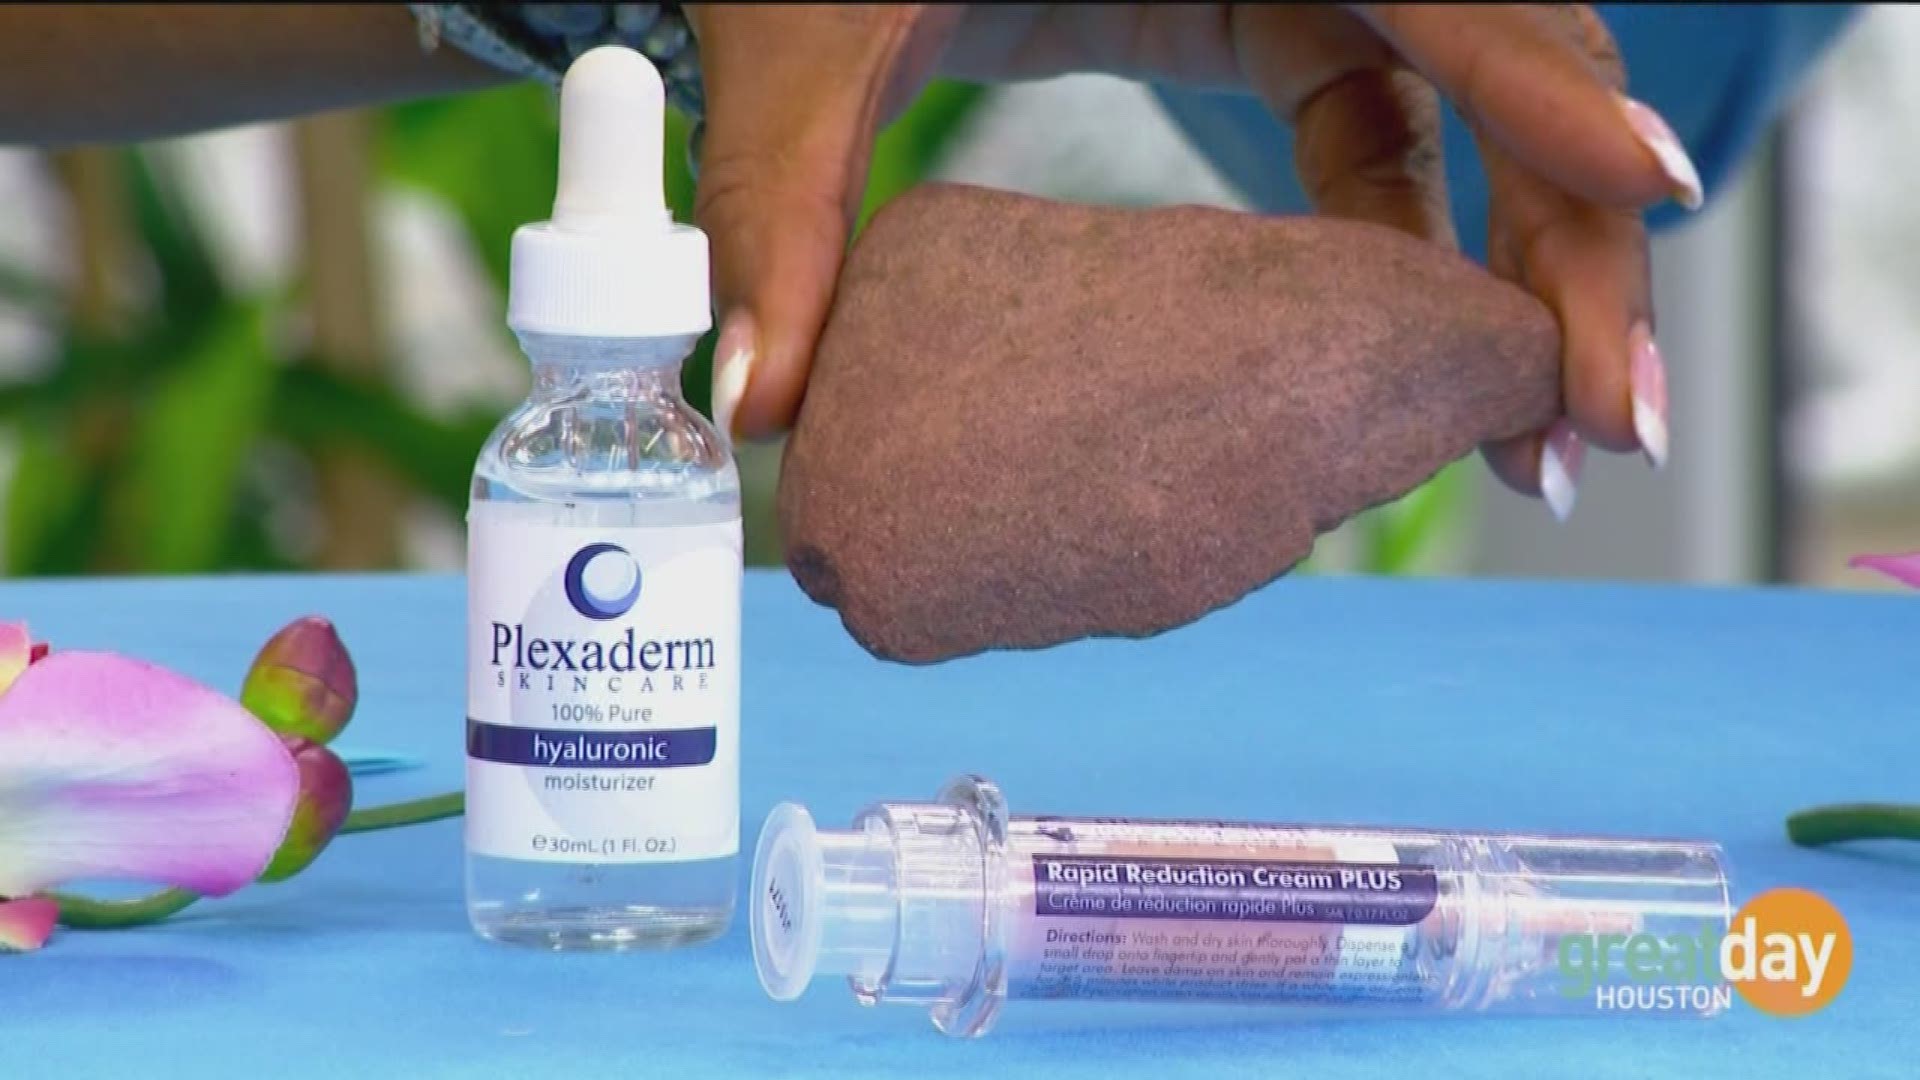 Plexaderm takes years off your face by making under eye bags and age lines disappear in just minutes.  Scott DeFalco showed Deborah Duncan it's amazing results.